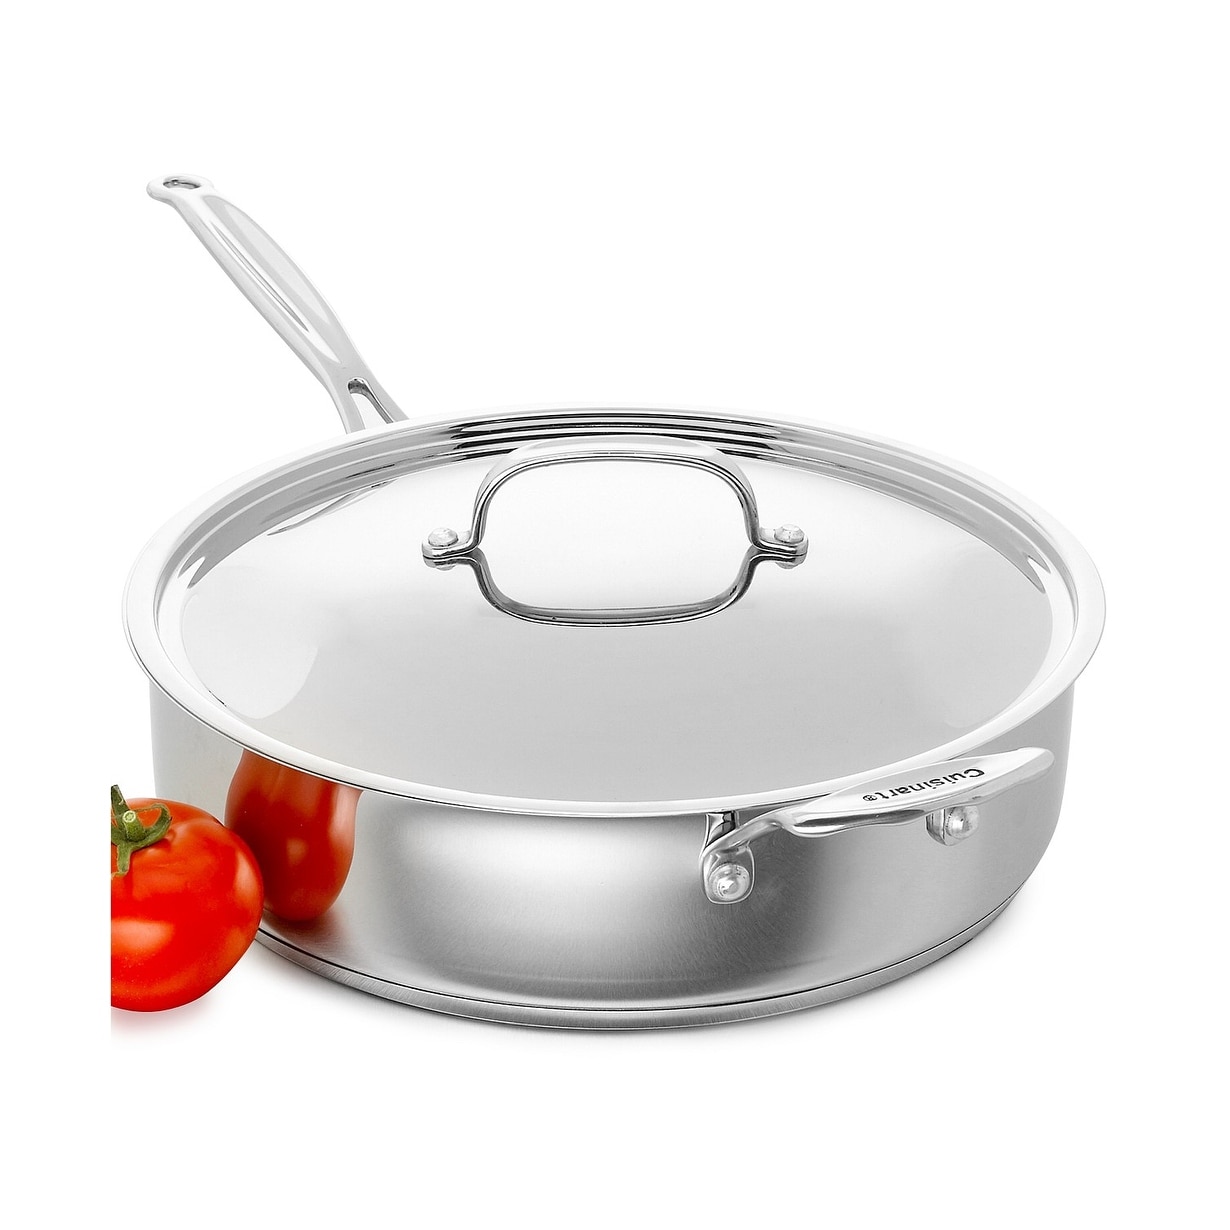 https://ak1.ostkcdn.com/images/products/is/images/direct/5935e3703c8f440d9a0872b8306247edaa3476ff/Cuisinart-733-30H-Chef%27s-Classic-Stainless-5-1-2-Quart-Saute-Pan-with-Helper-Handle-and-Cover.jpg